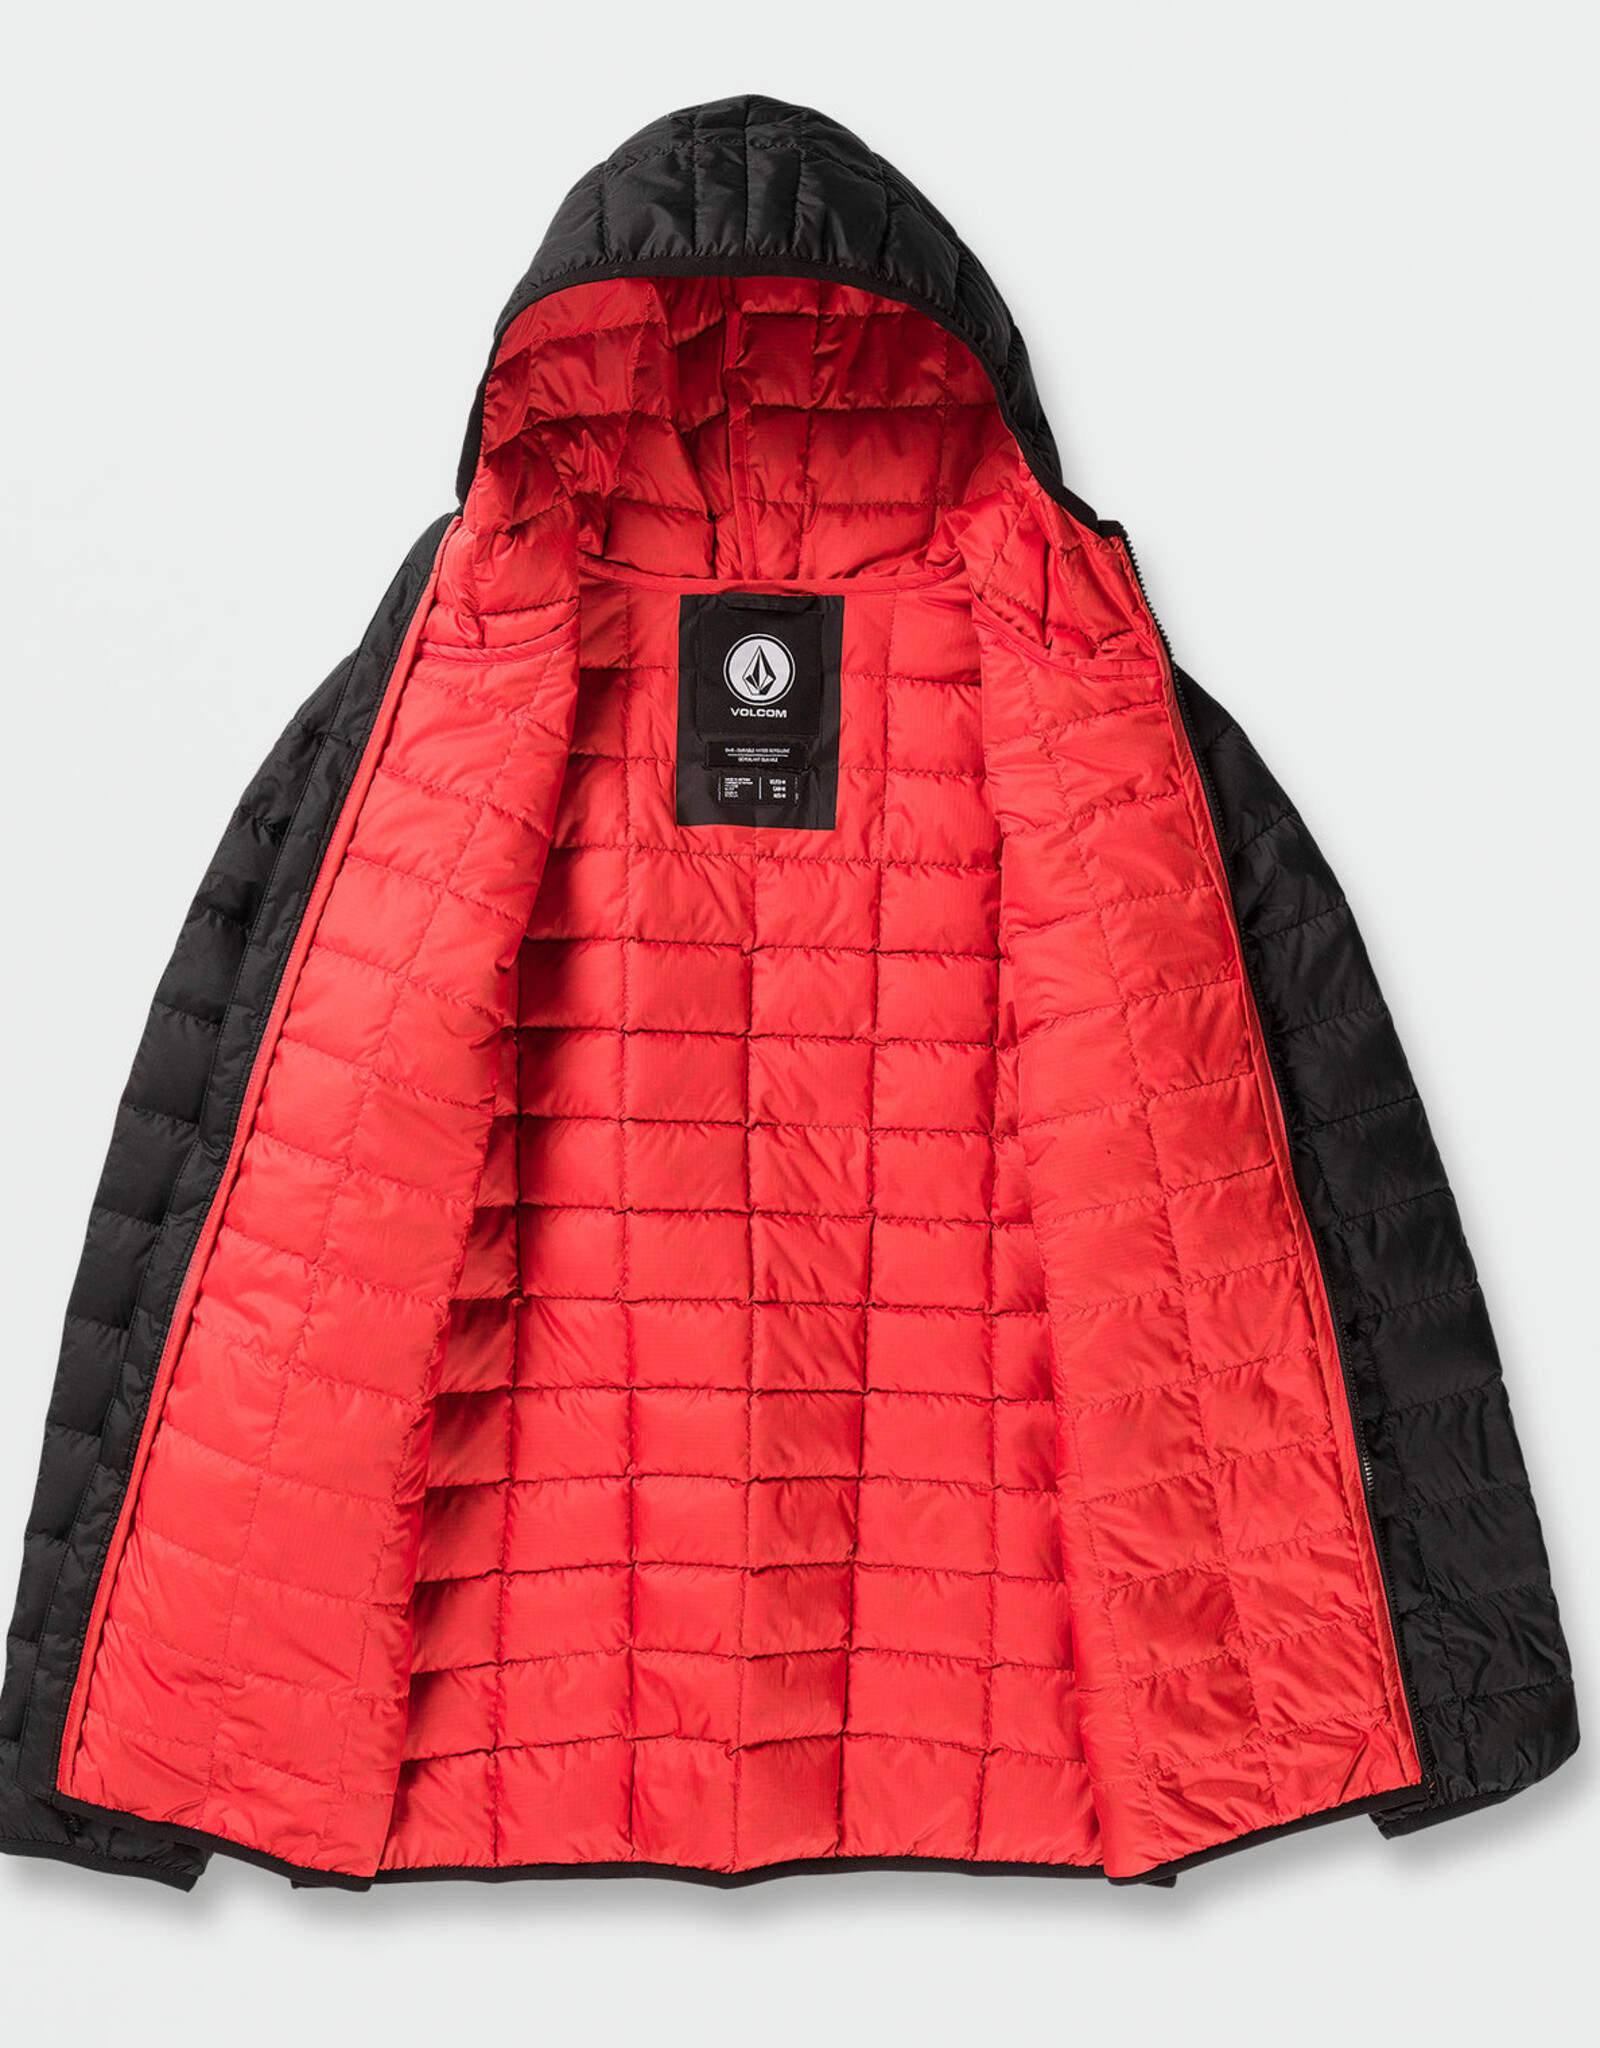 VOLCOM OUTERWEAR VOLCOM - PUFF PUFF GIVE JACKET - BLACK -